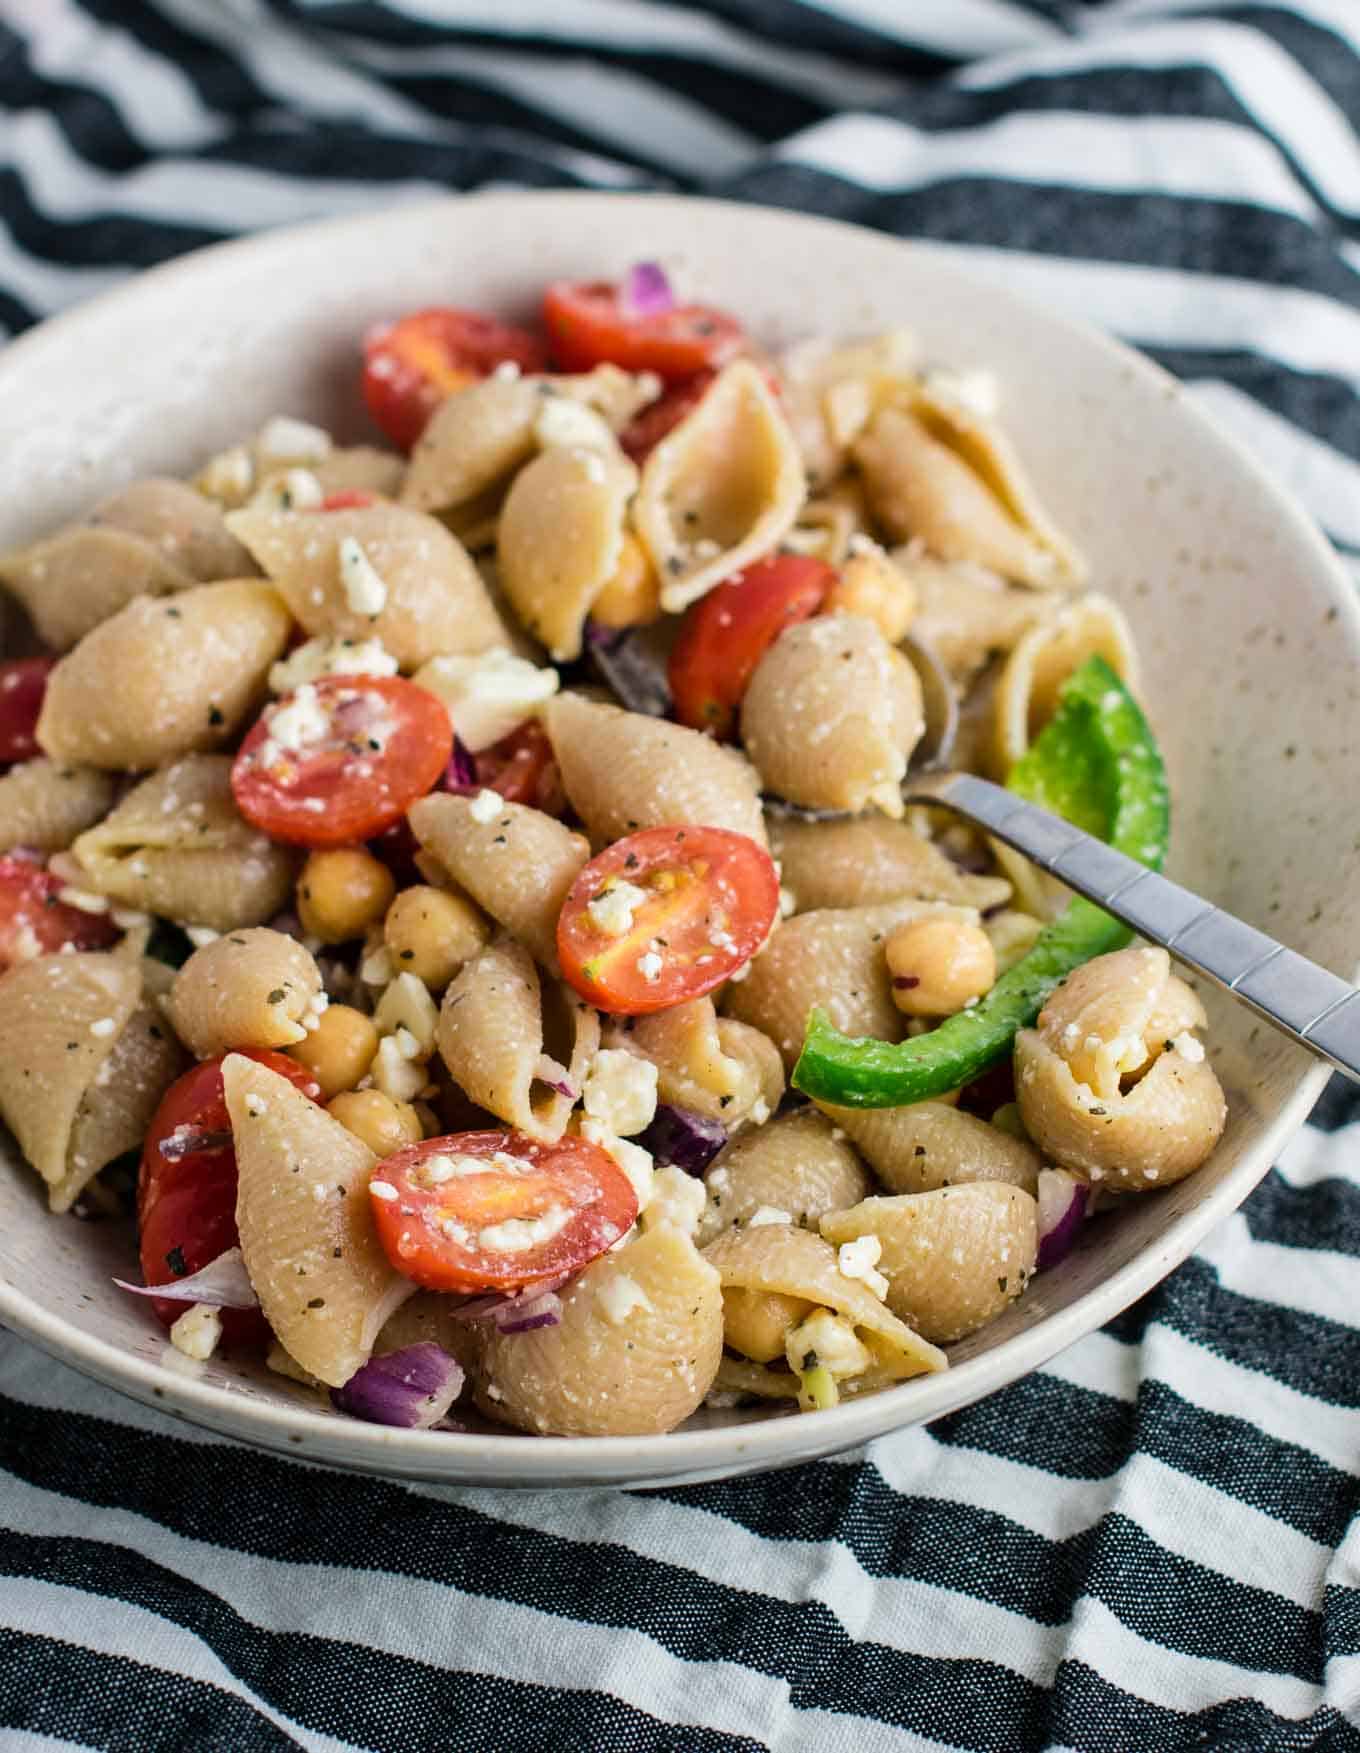 This Chickpea Pasta Salad with whole wheat pasta is an easy vegetarian pasta salad recipe. Perfect to take to parties, or as a healthy meal prep lunch. So addicting and full of good for you ingredients! #vegetarian #pastasalad #chickpea #feta #vegetarianpastasalad